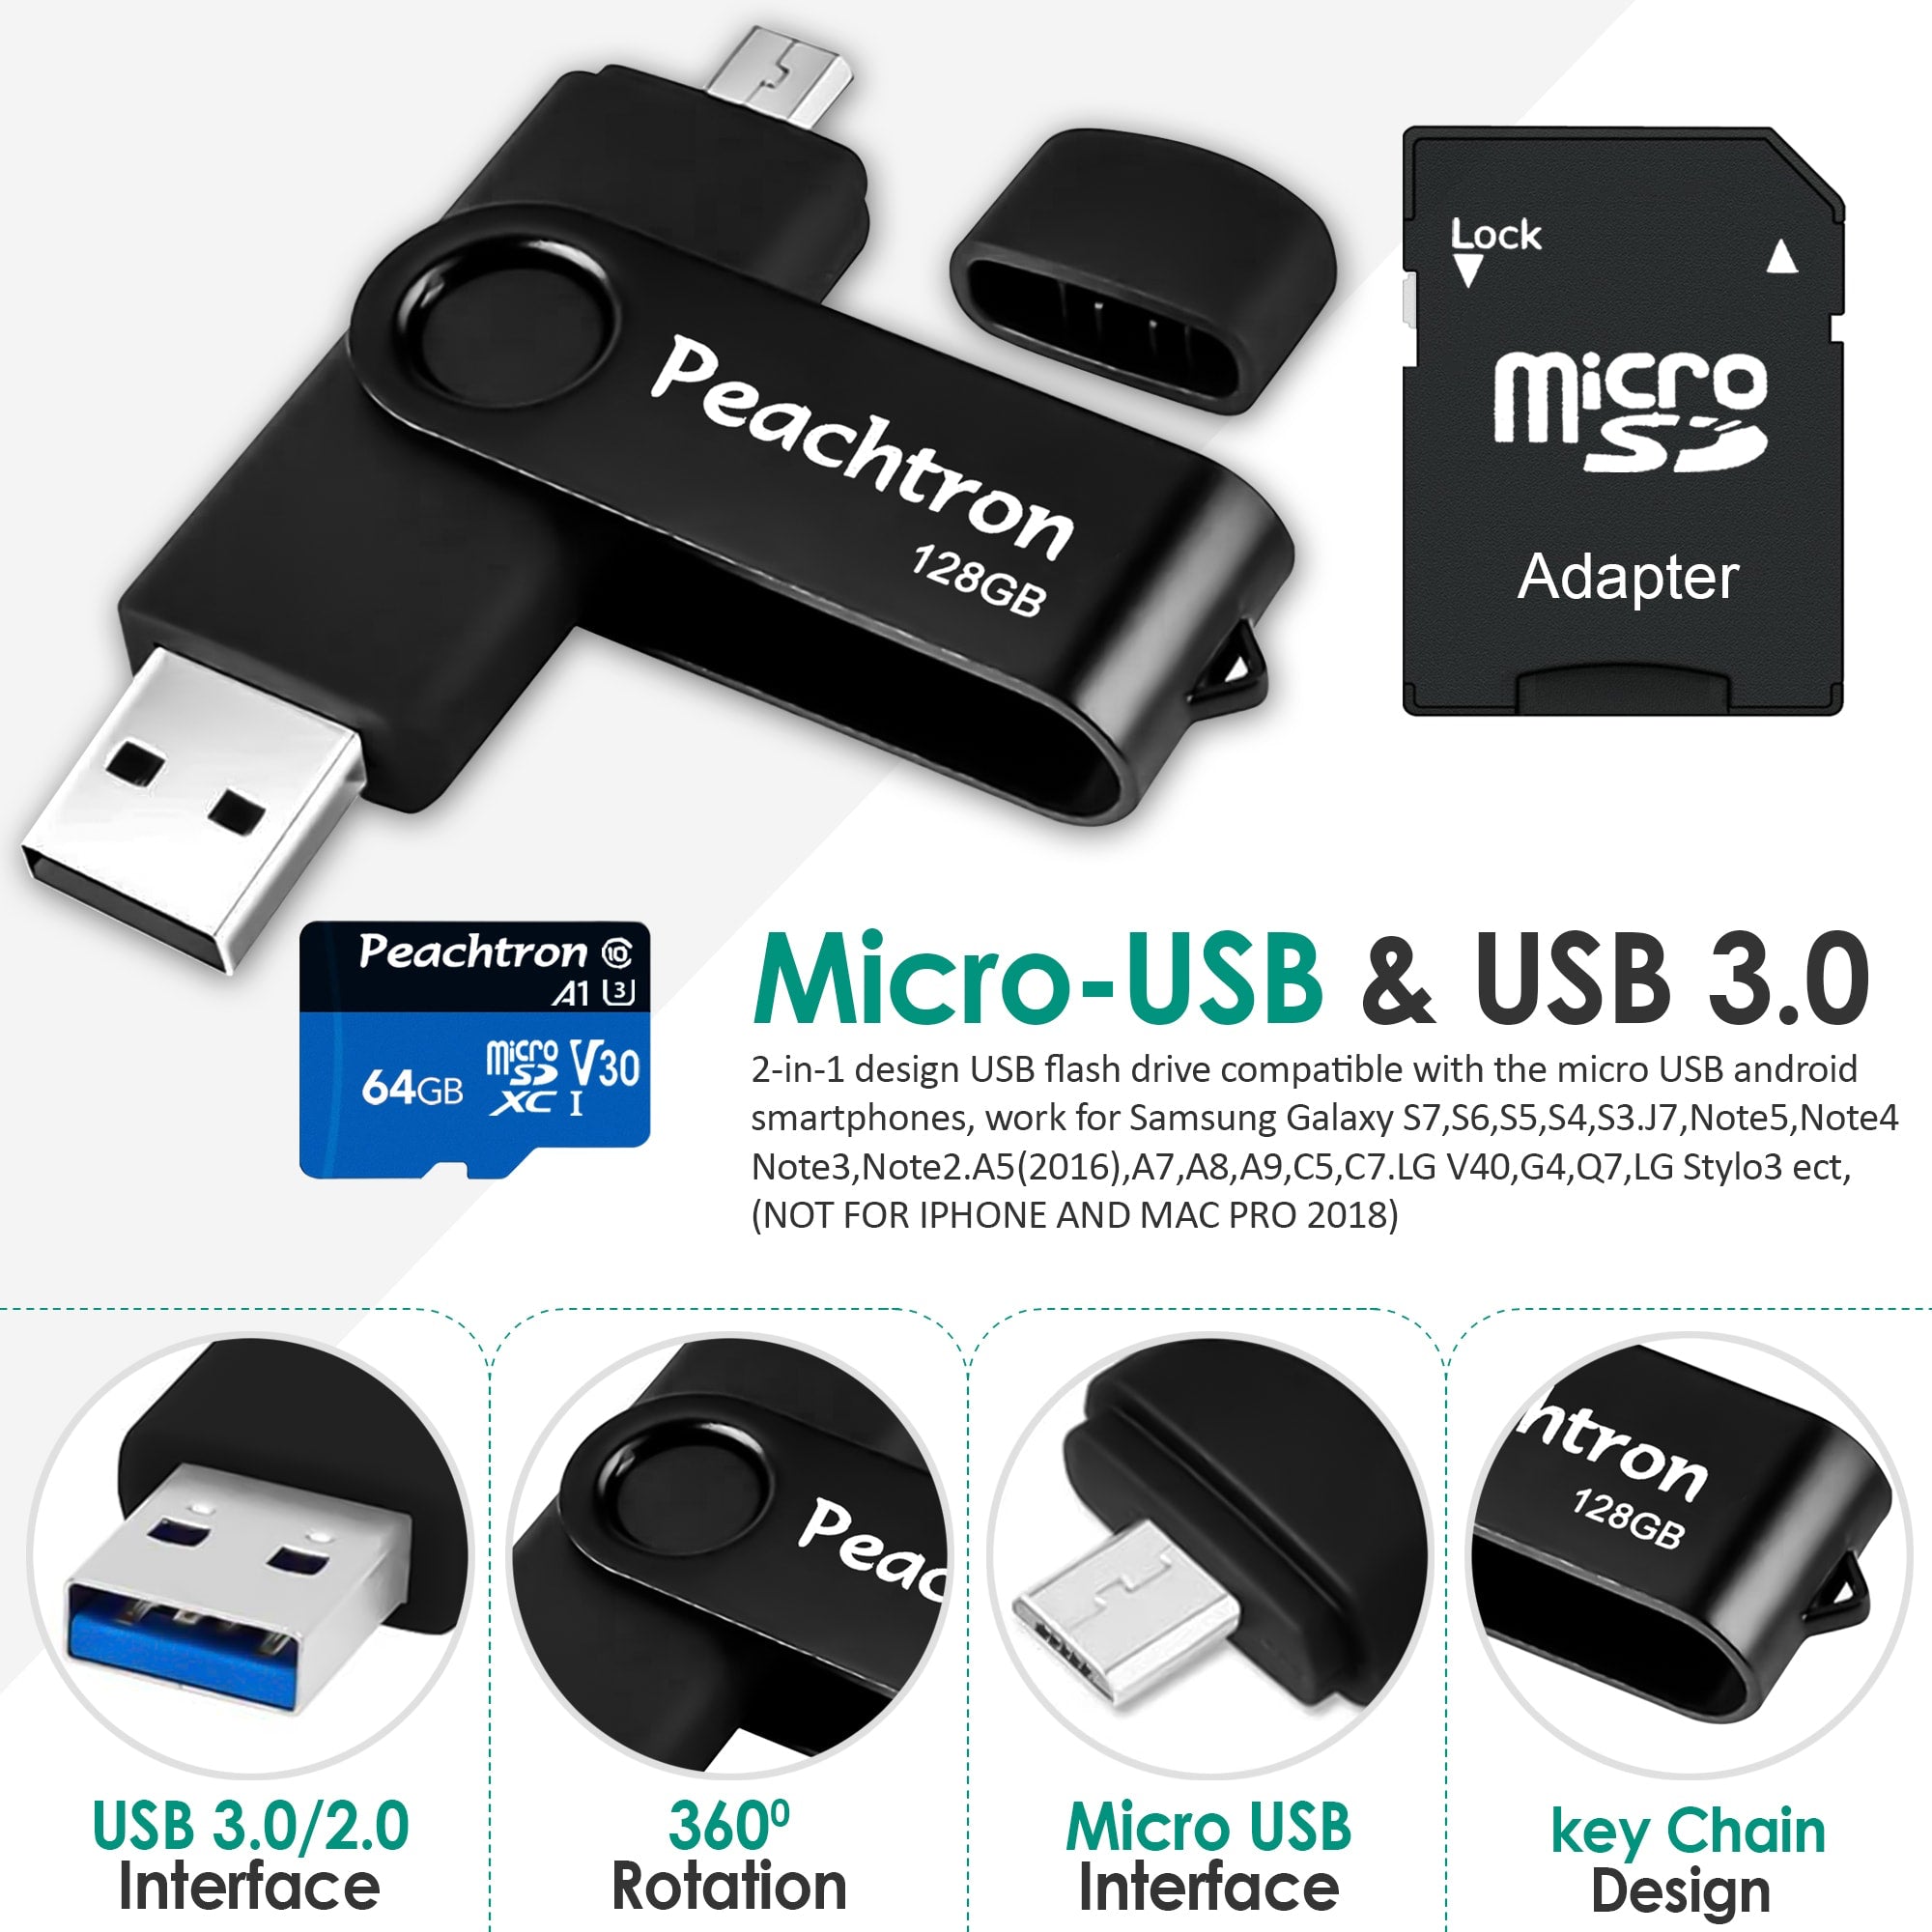 2-IN-1 USB FLASH DRIVE AND 64GB COMBO –